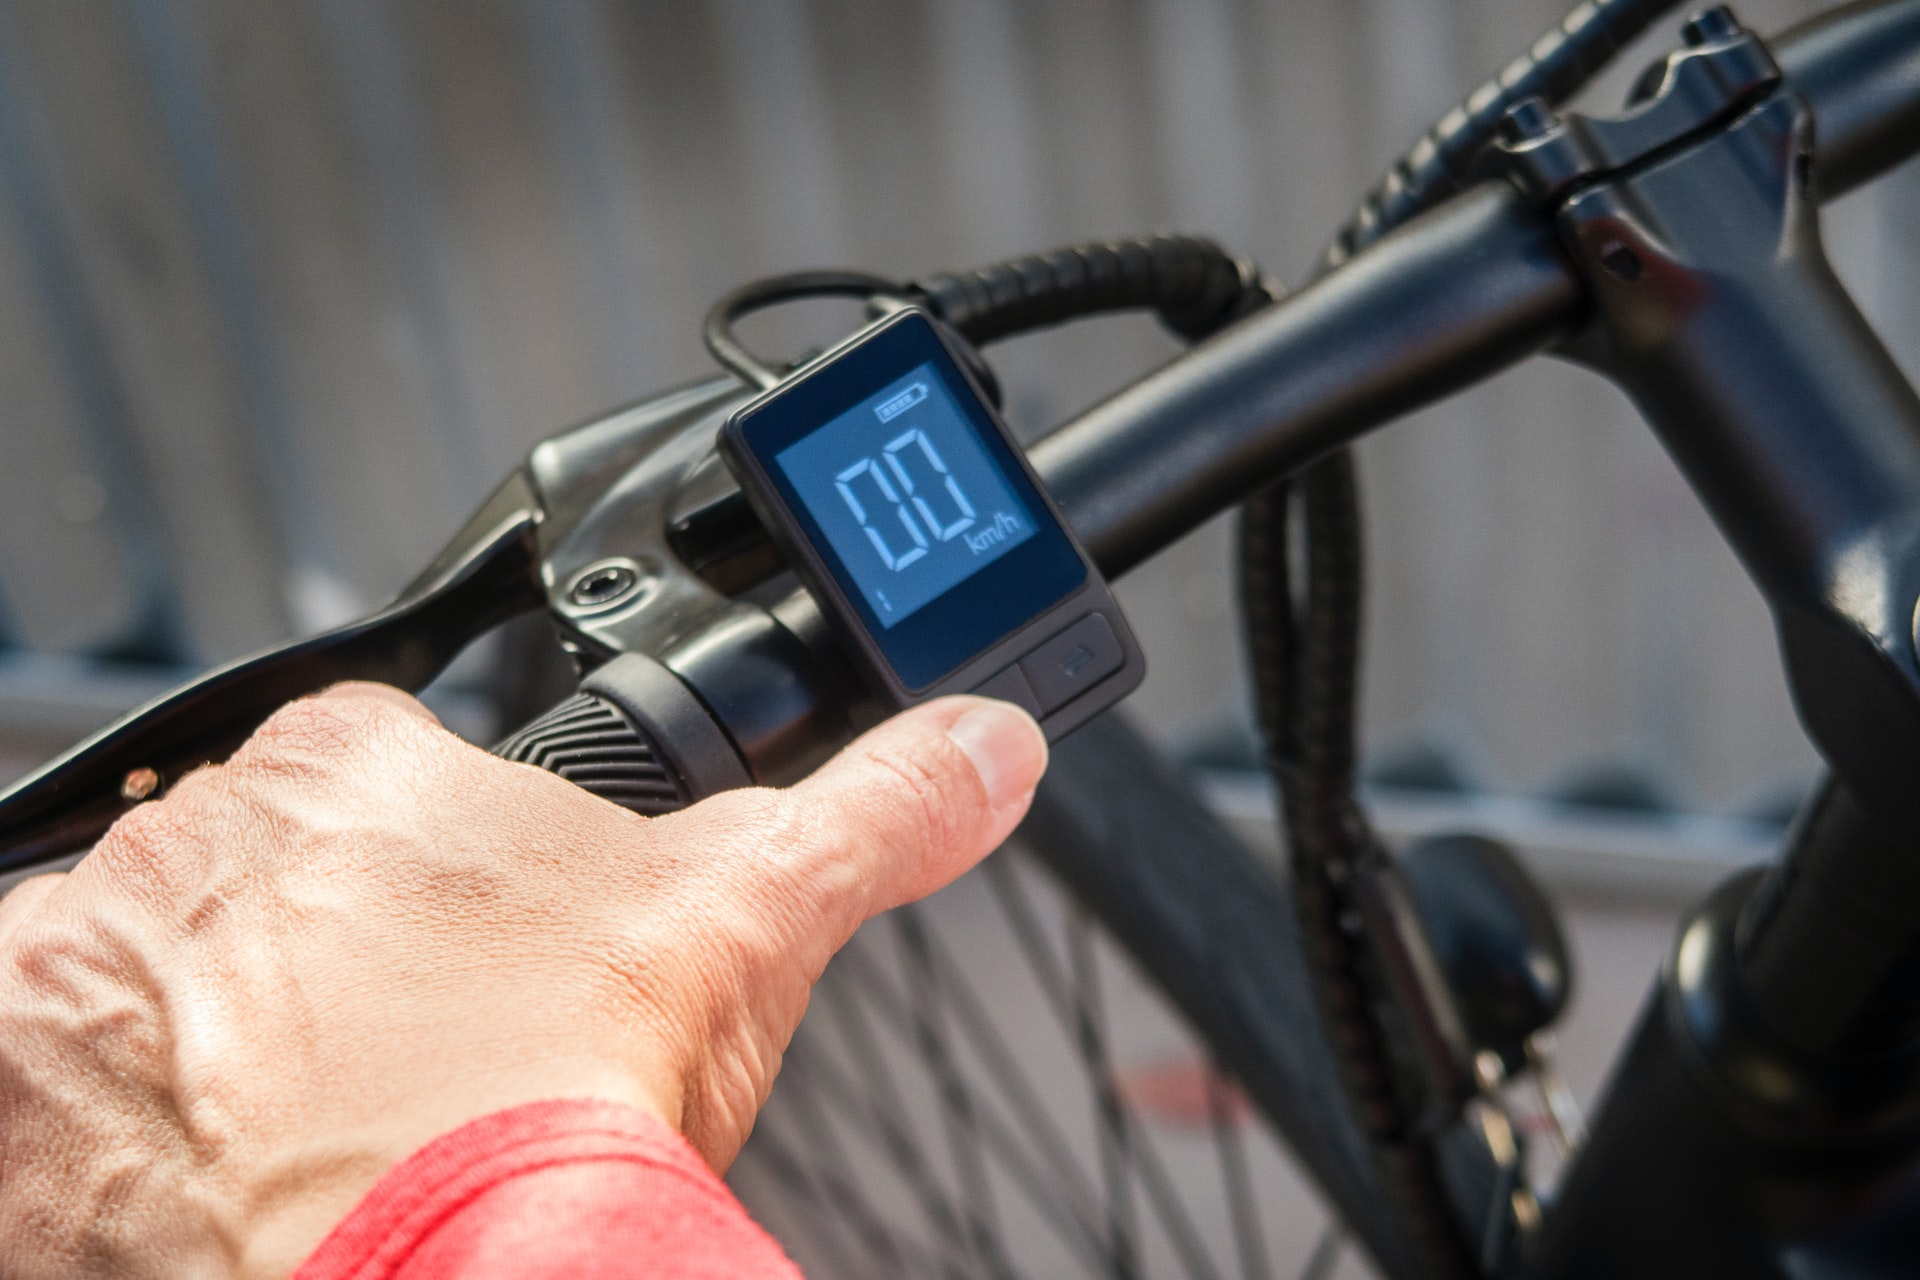 Close-up of an ebike's display screen